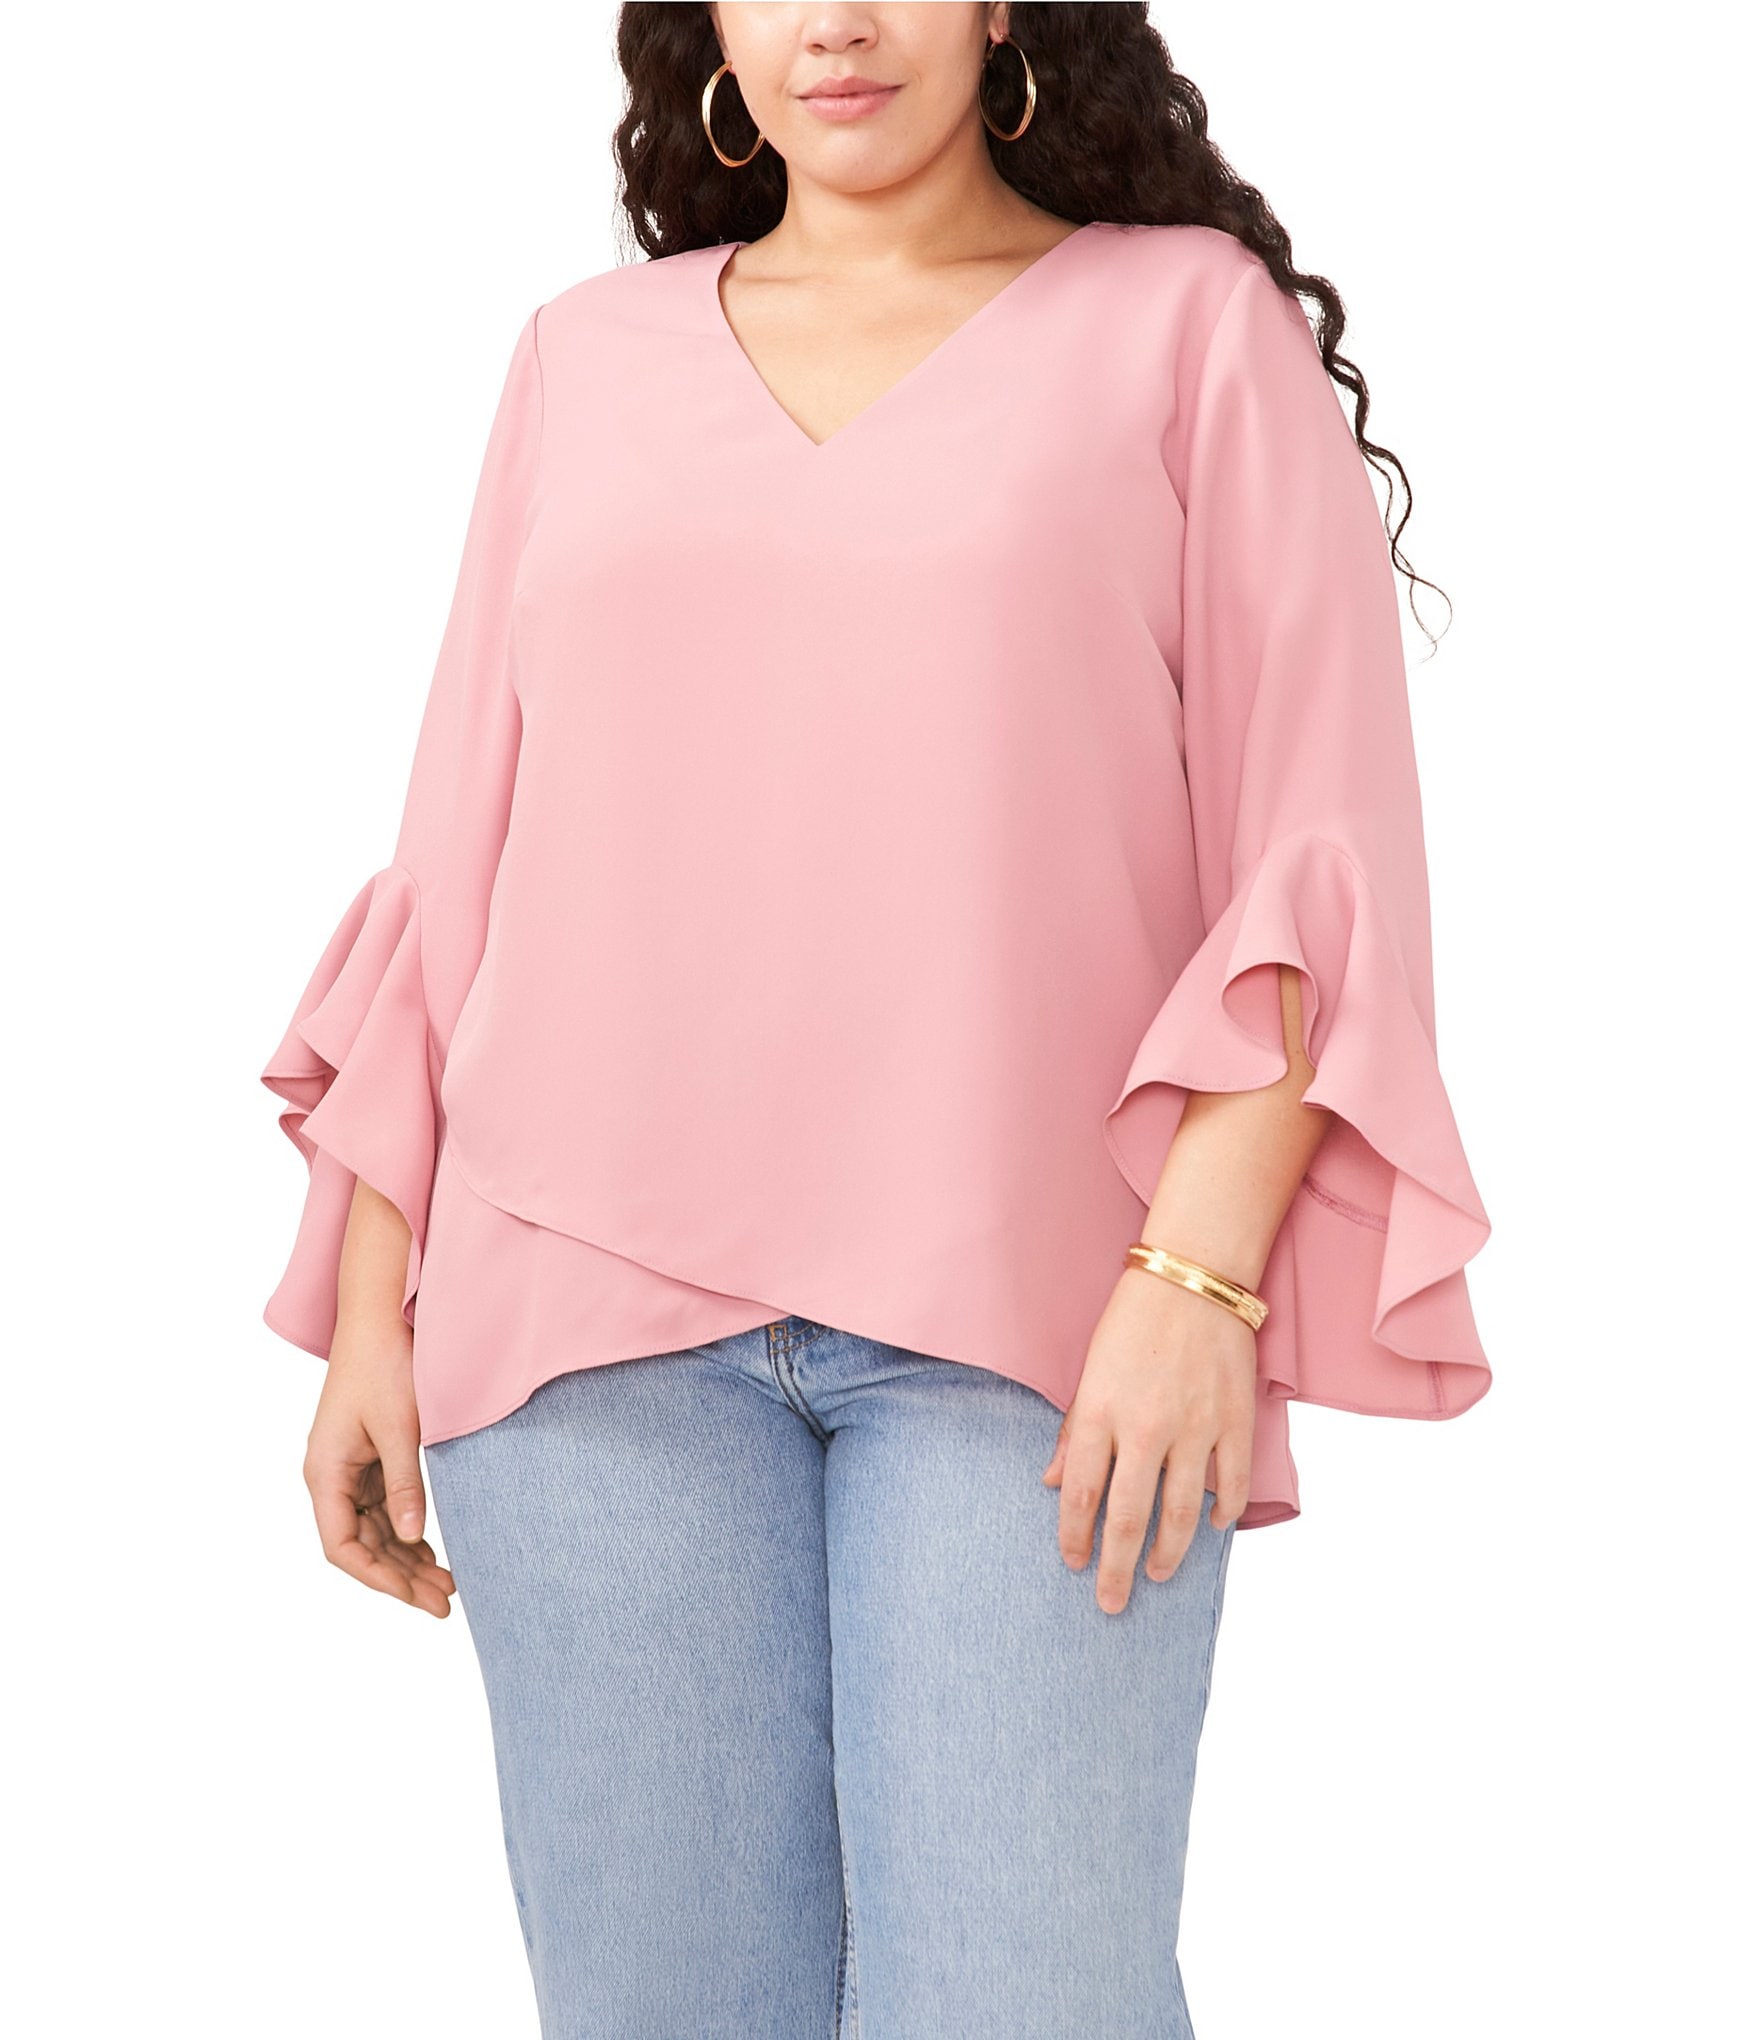 Torrid Plus Size Women's Clothing for sale in Canton Junction